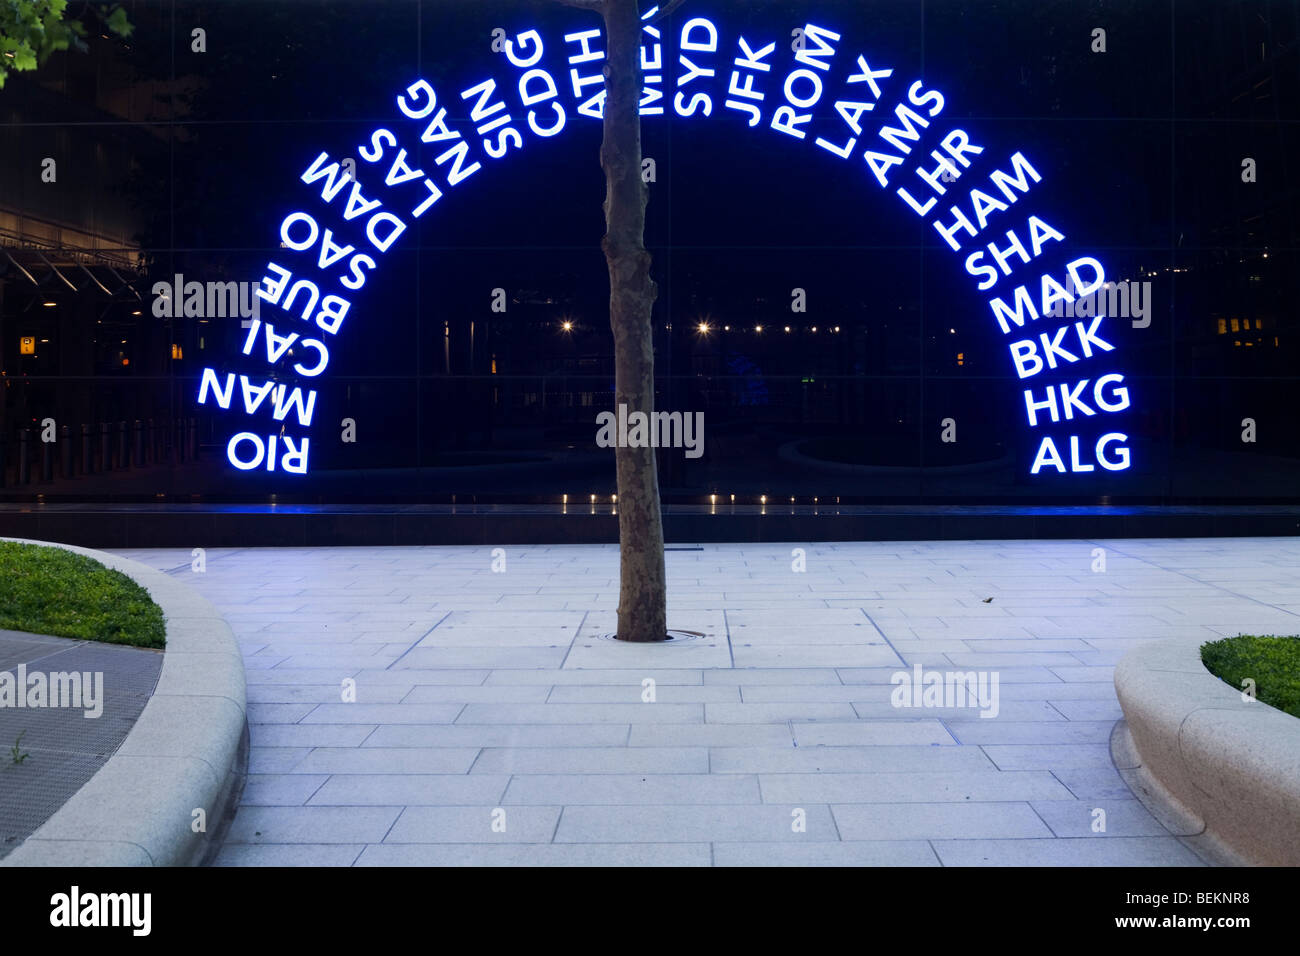 Three letter IATA codes for some of the world's airport destinations used as part of  art design in a plaza outside Heathrow T5 Stock Photo